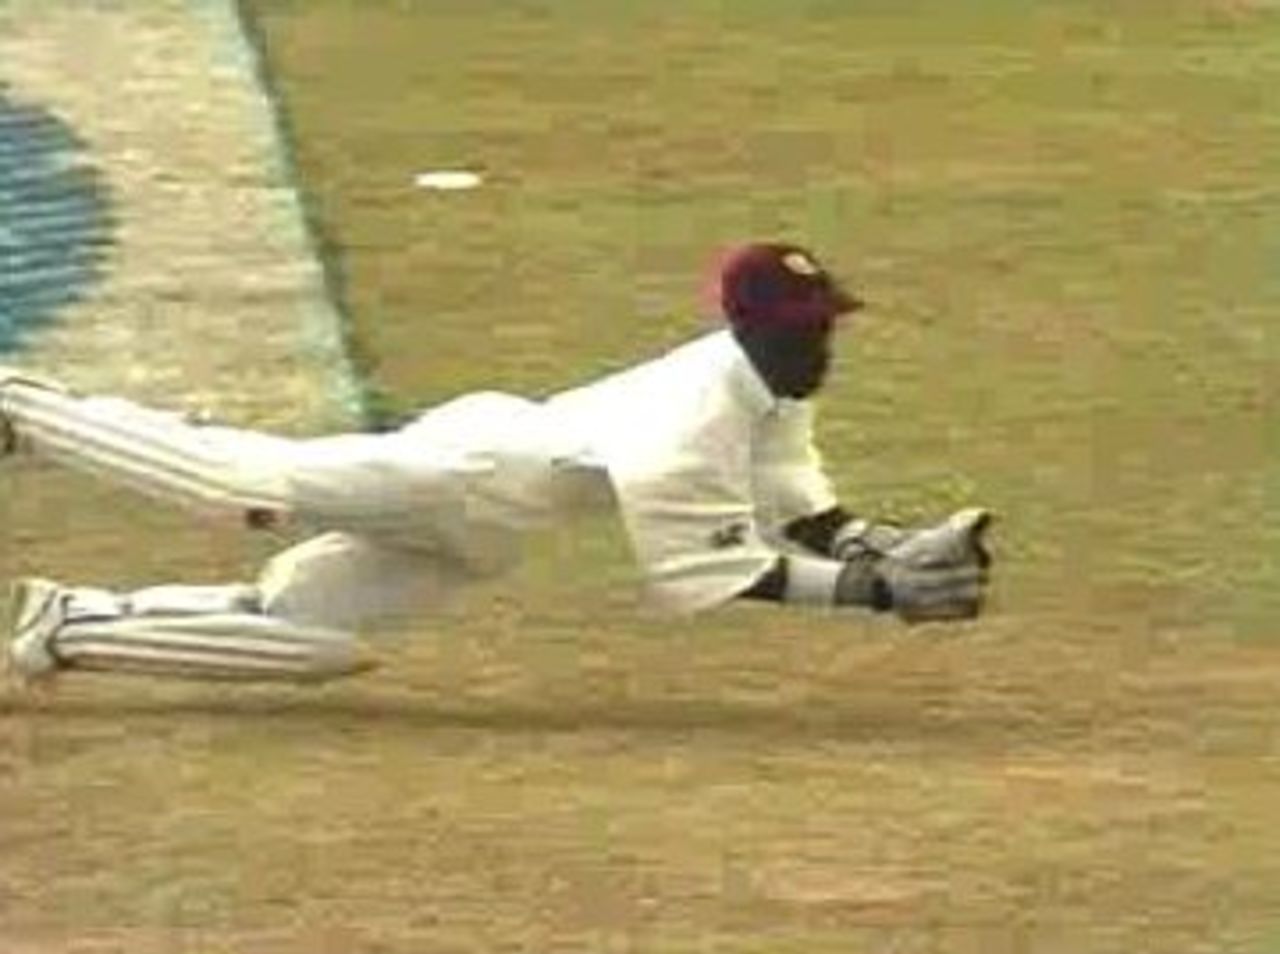 3rd Test, West Indies v England Feb 13-17 1998 Final day. Williams dives to catch Thorpe